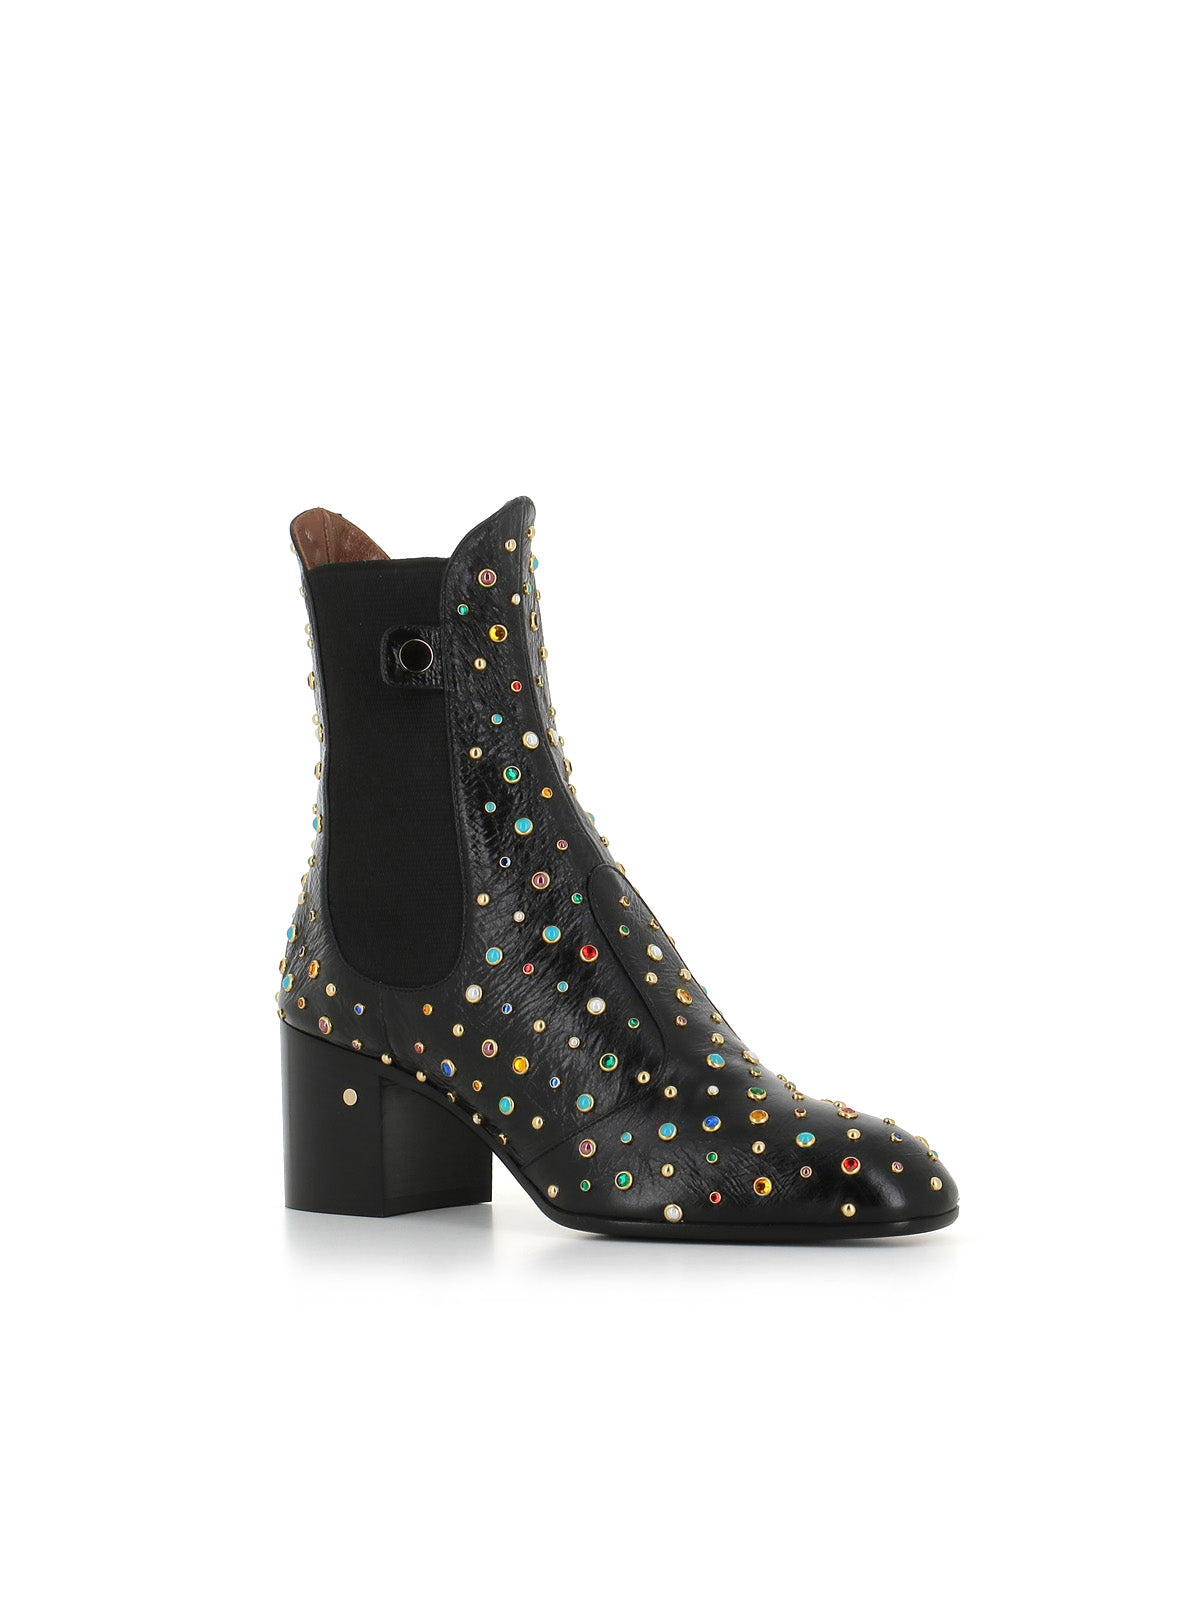  Boot Angie Multicolor Studs Laurence Dacade Donna Nero - 3